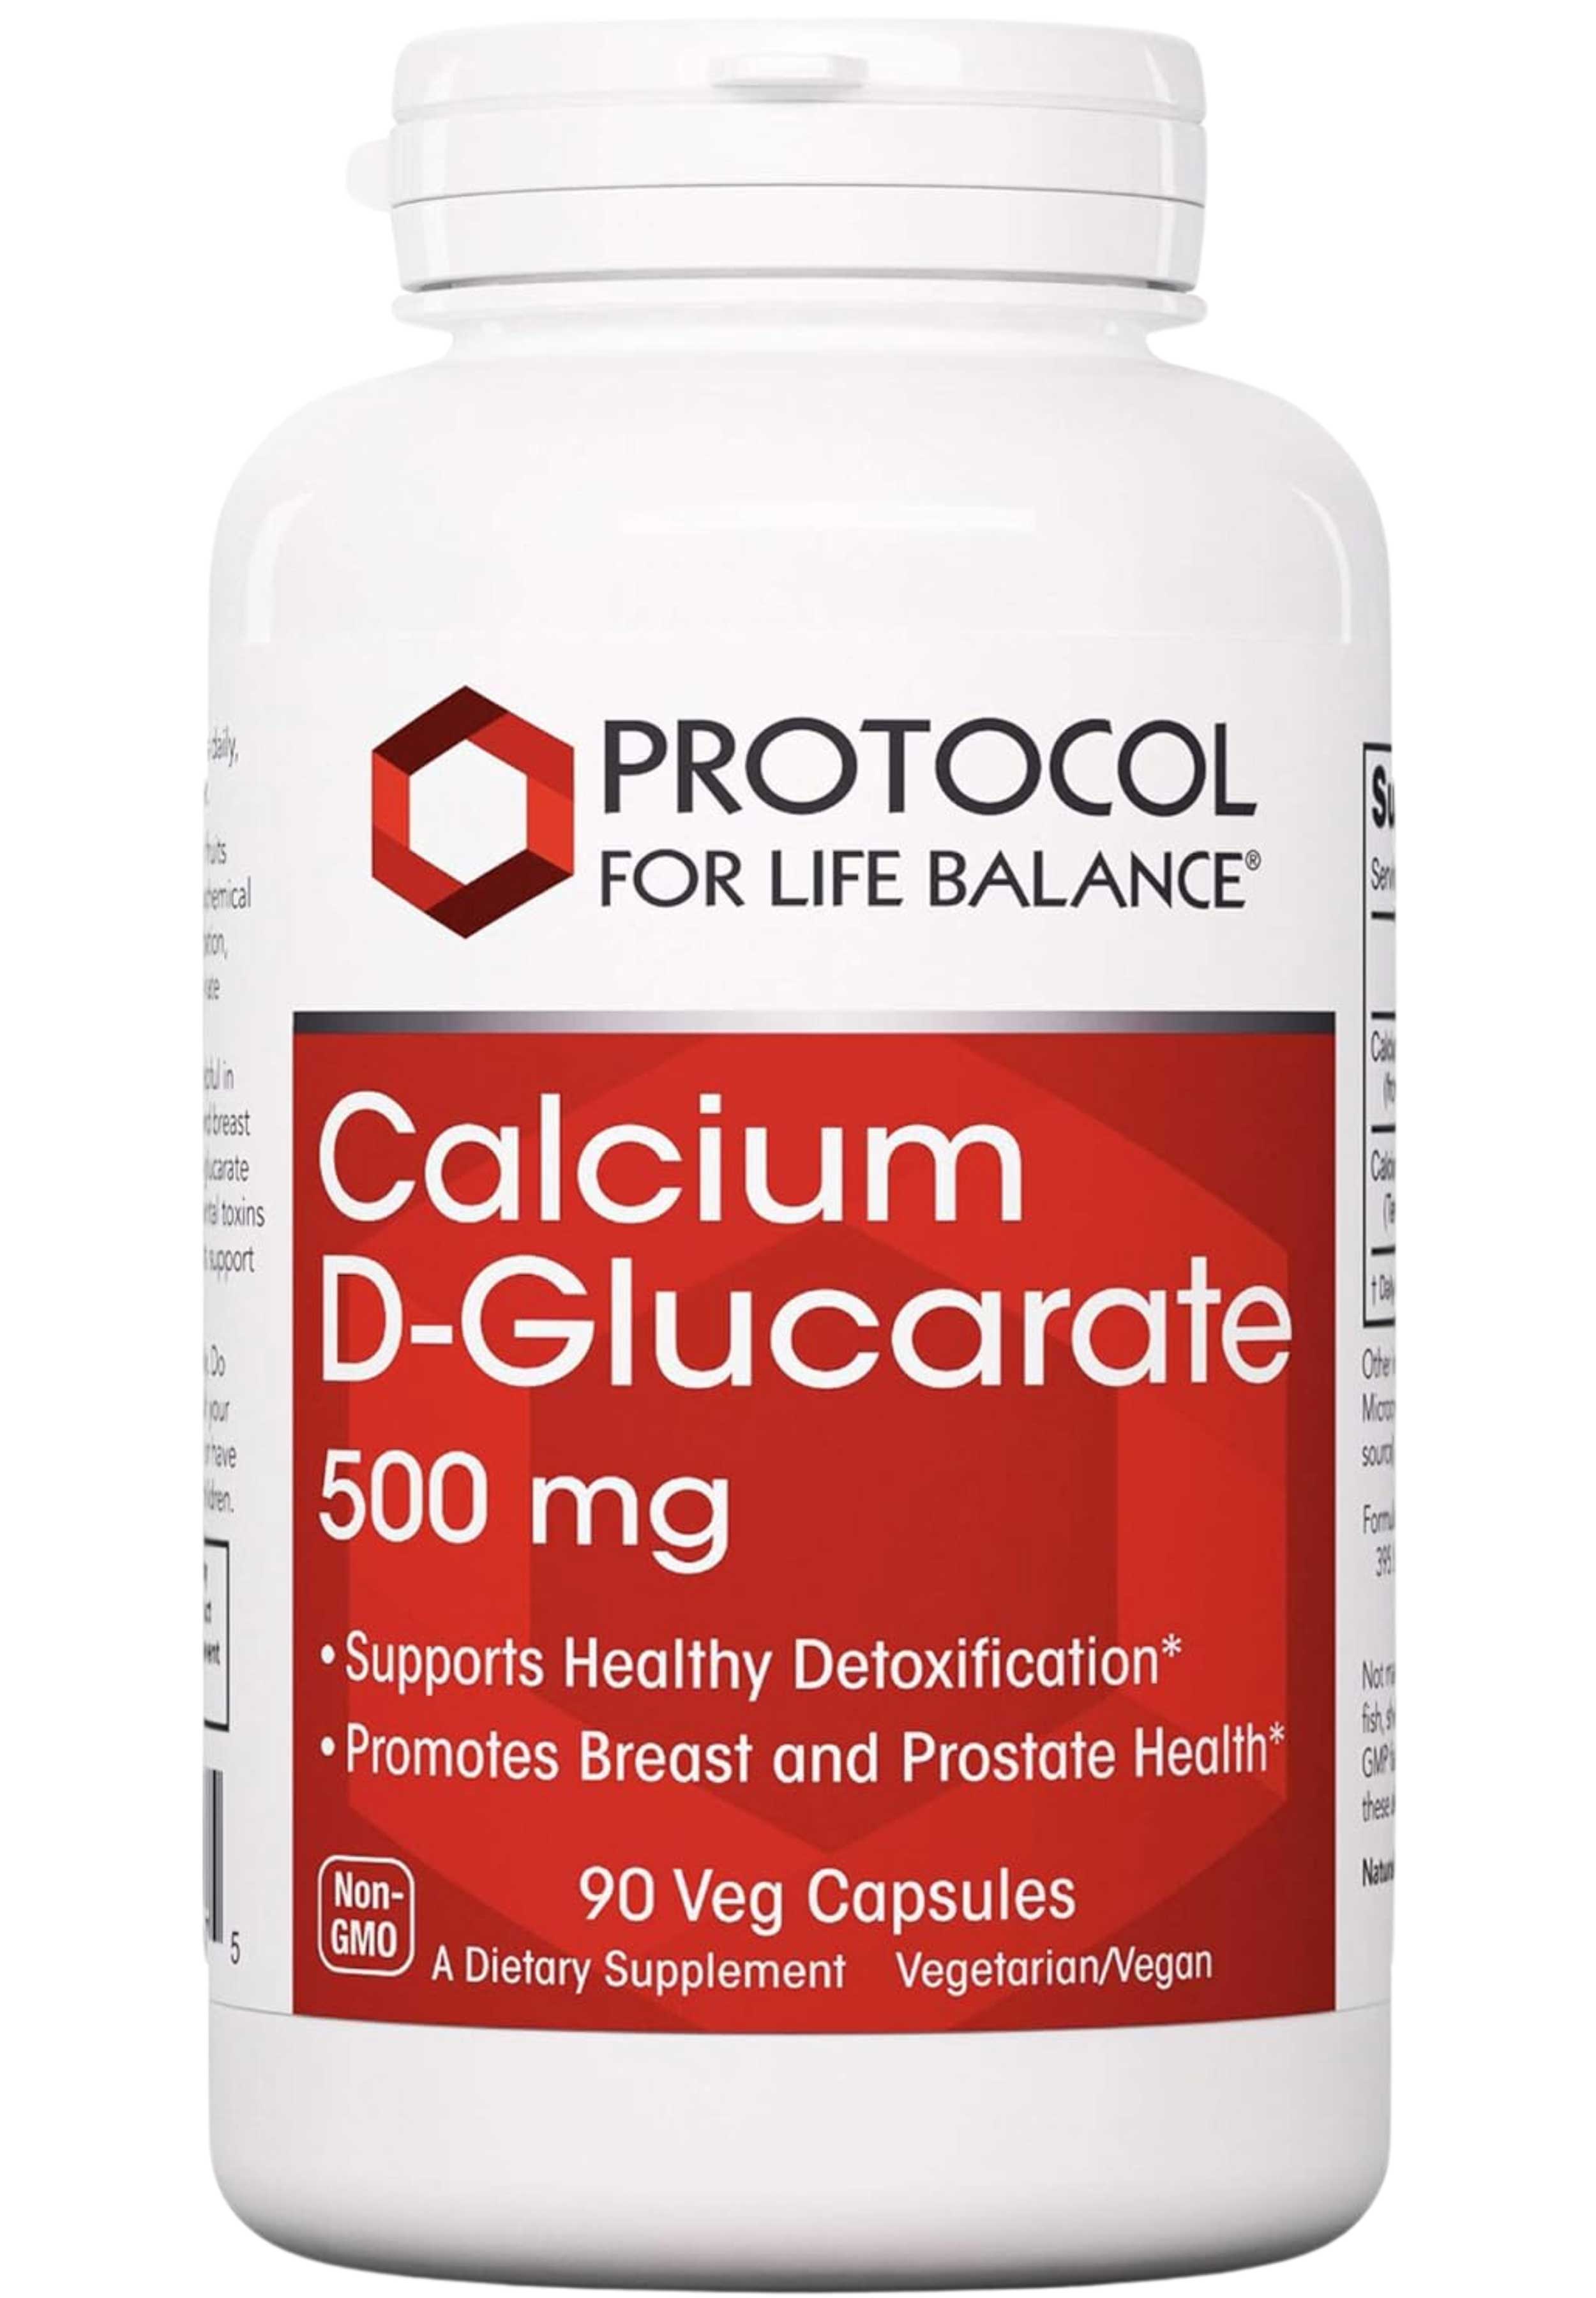 Protocol for Life Balance Calcium D-Glucarate 500 mg